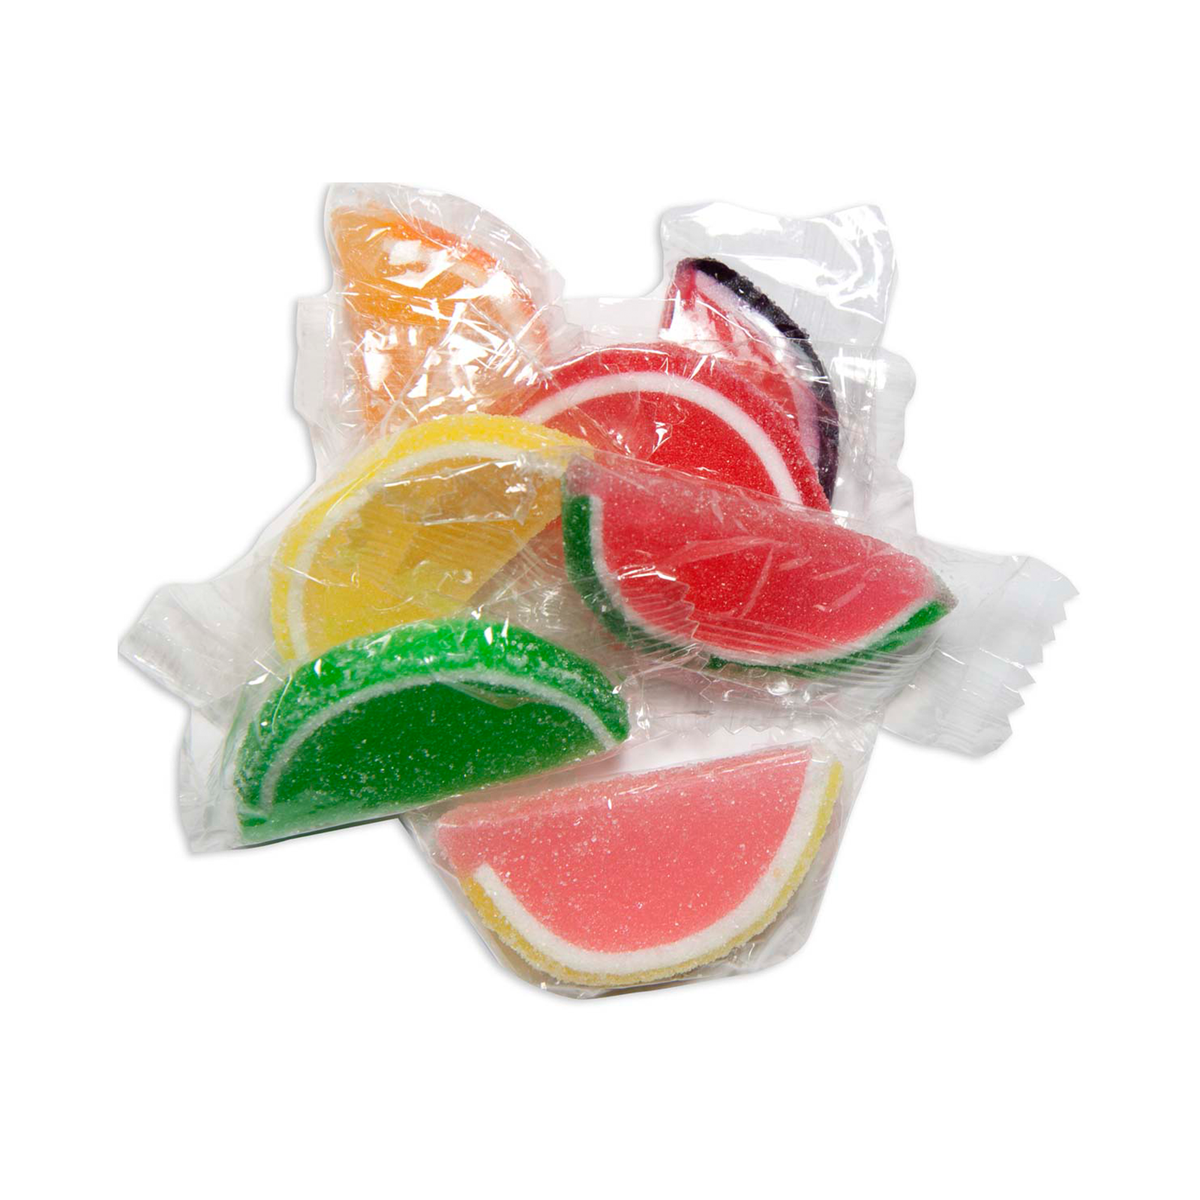  Fake Candy Rainbow PRIMARY LARGE Gumdrops Display Food Prop  Decor : Handmade Products